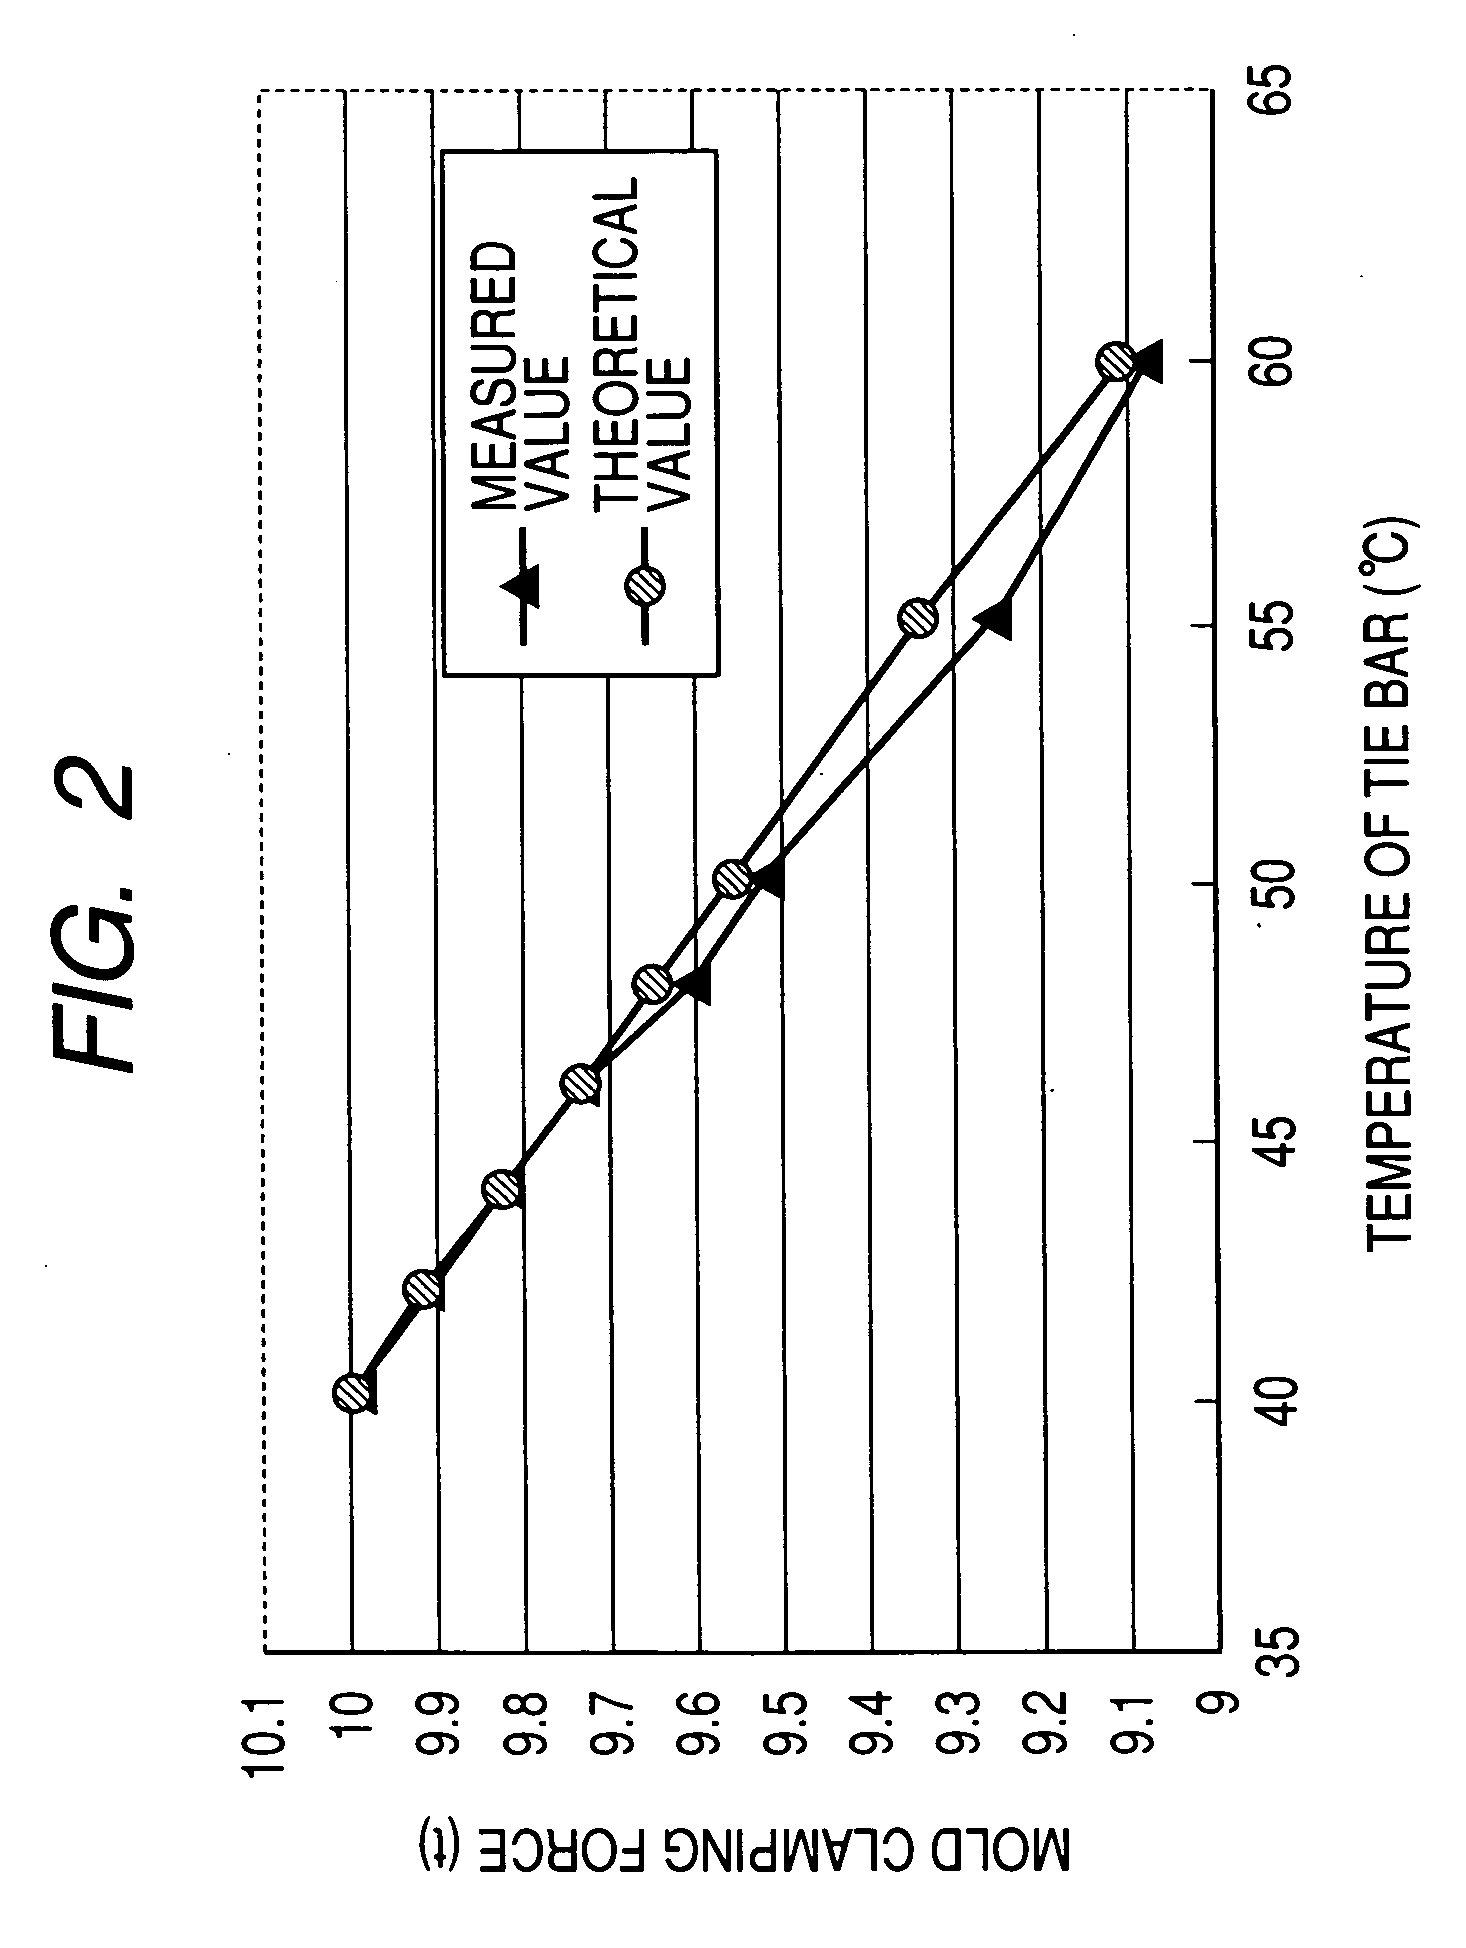 Mold clamping apparatus of injection molding machine and method of adjusting effective length of tie bar